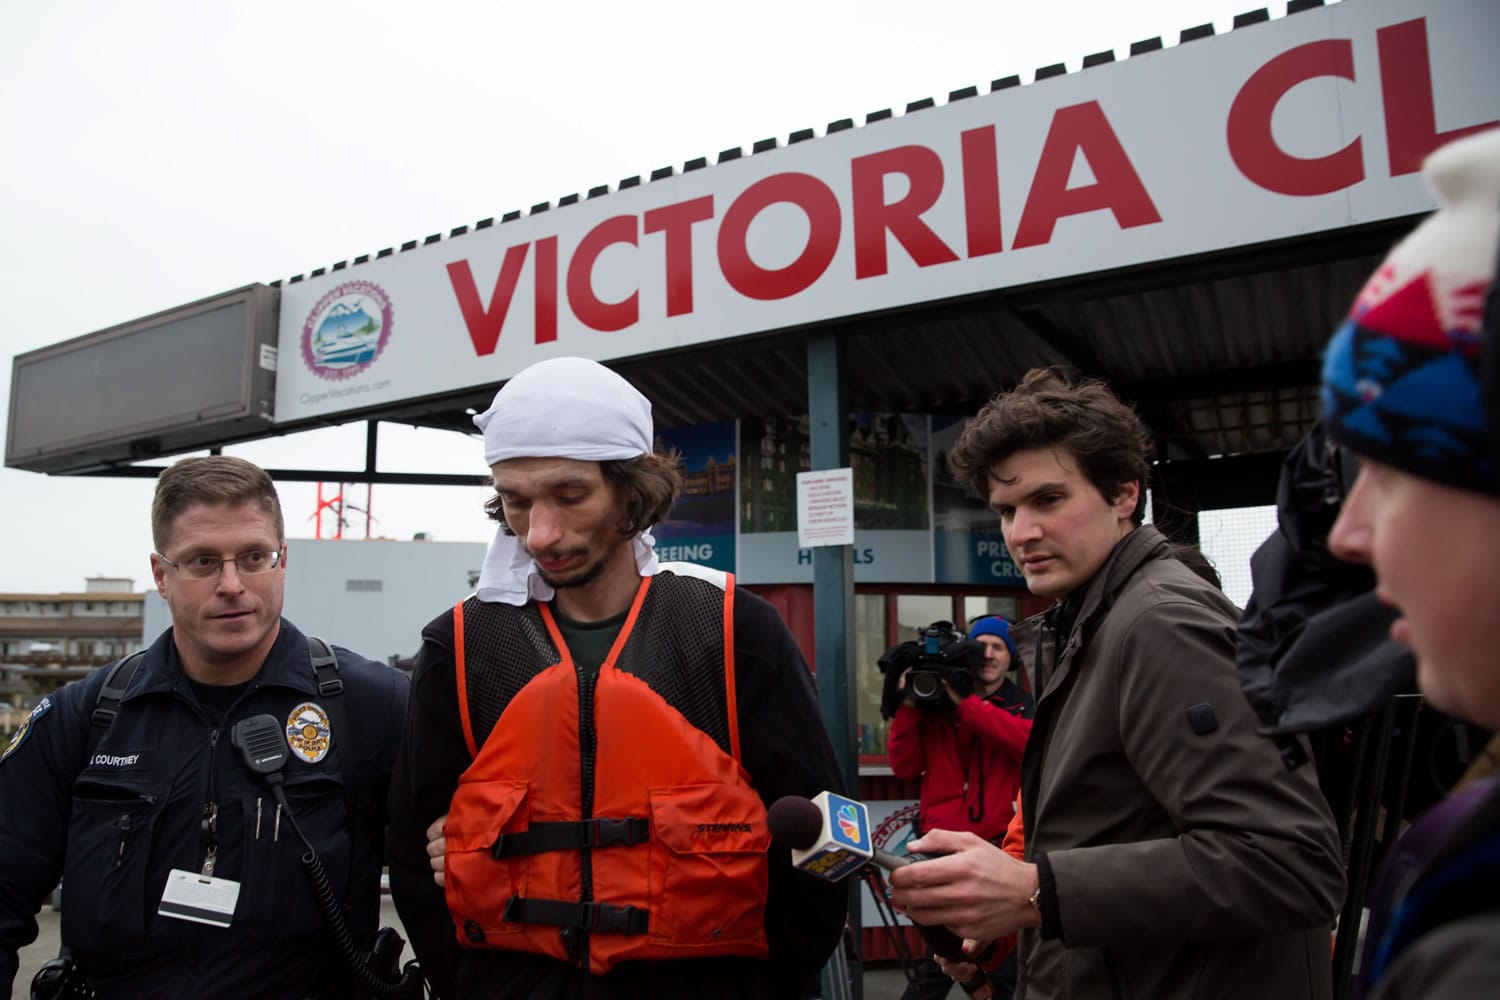 A police officer escorts an apprehended suspect, wearing a white cloth on his head, who allegedly commandeered the Victoria Clipper after it was found adrift in Elliot Bay in Seattle on Sunday